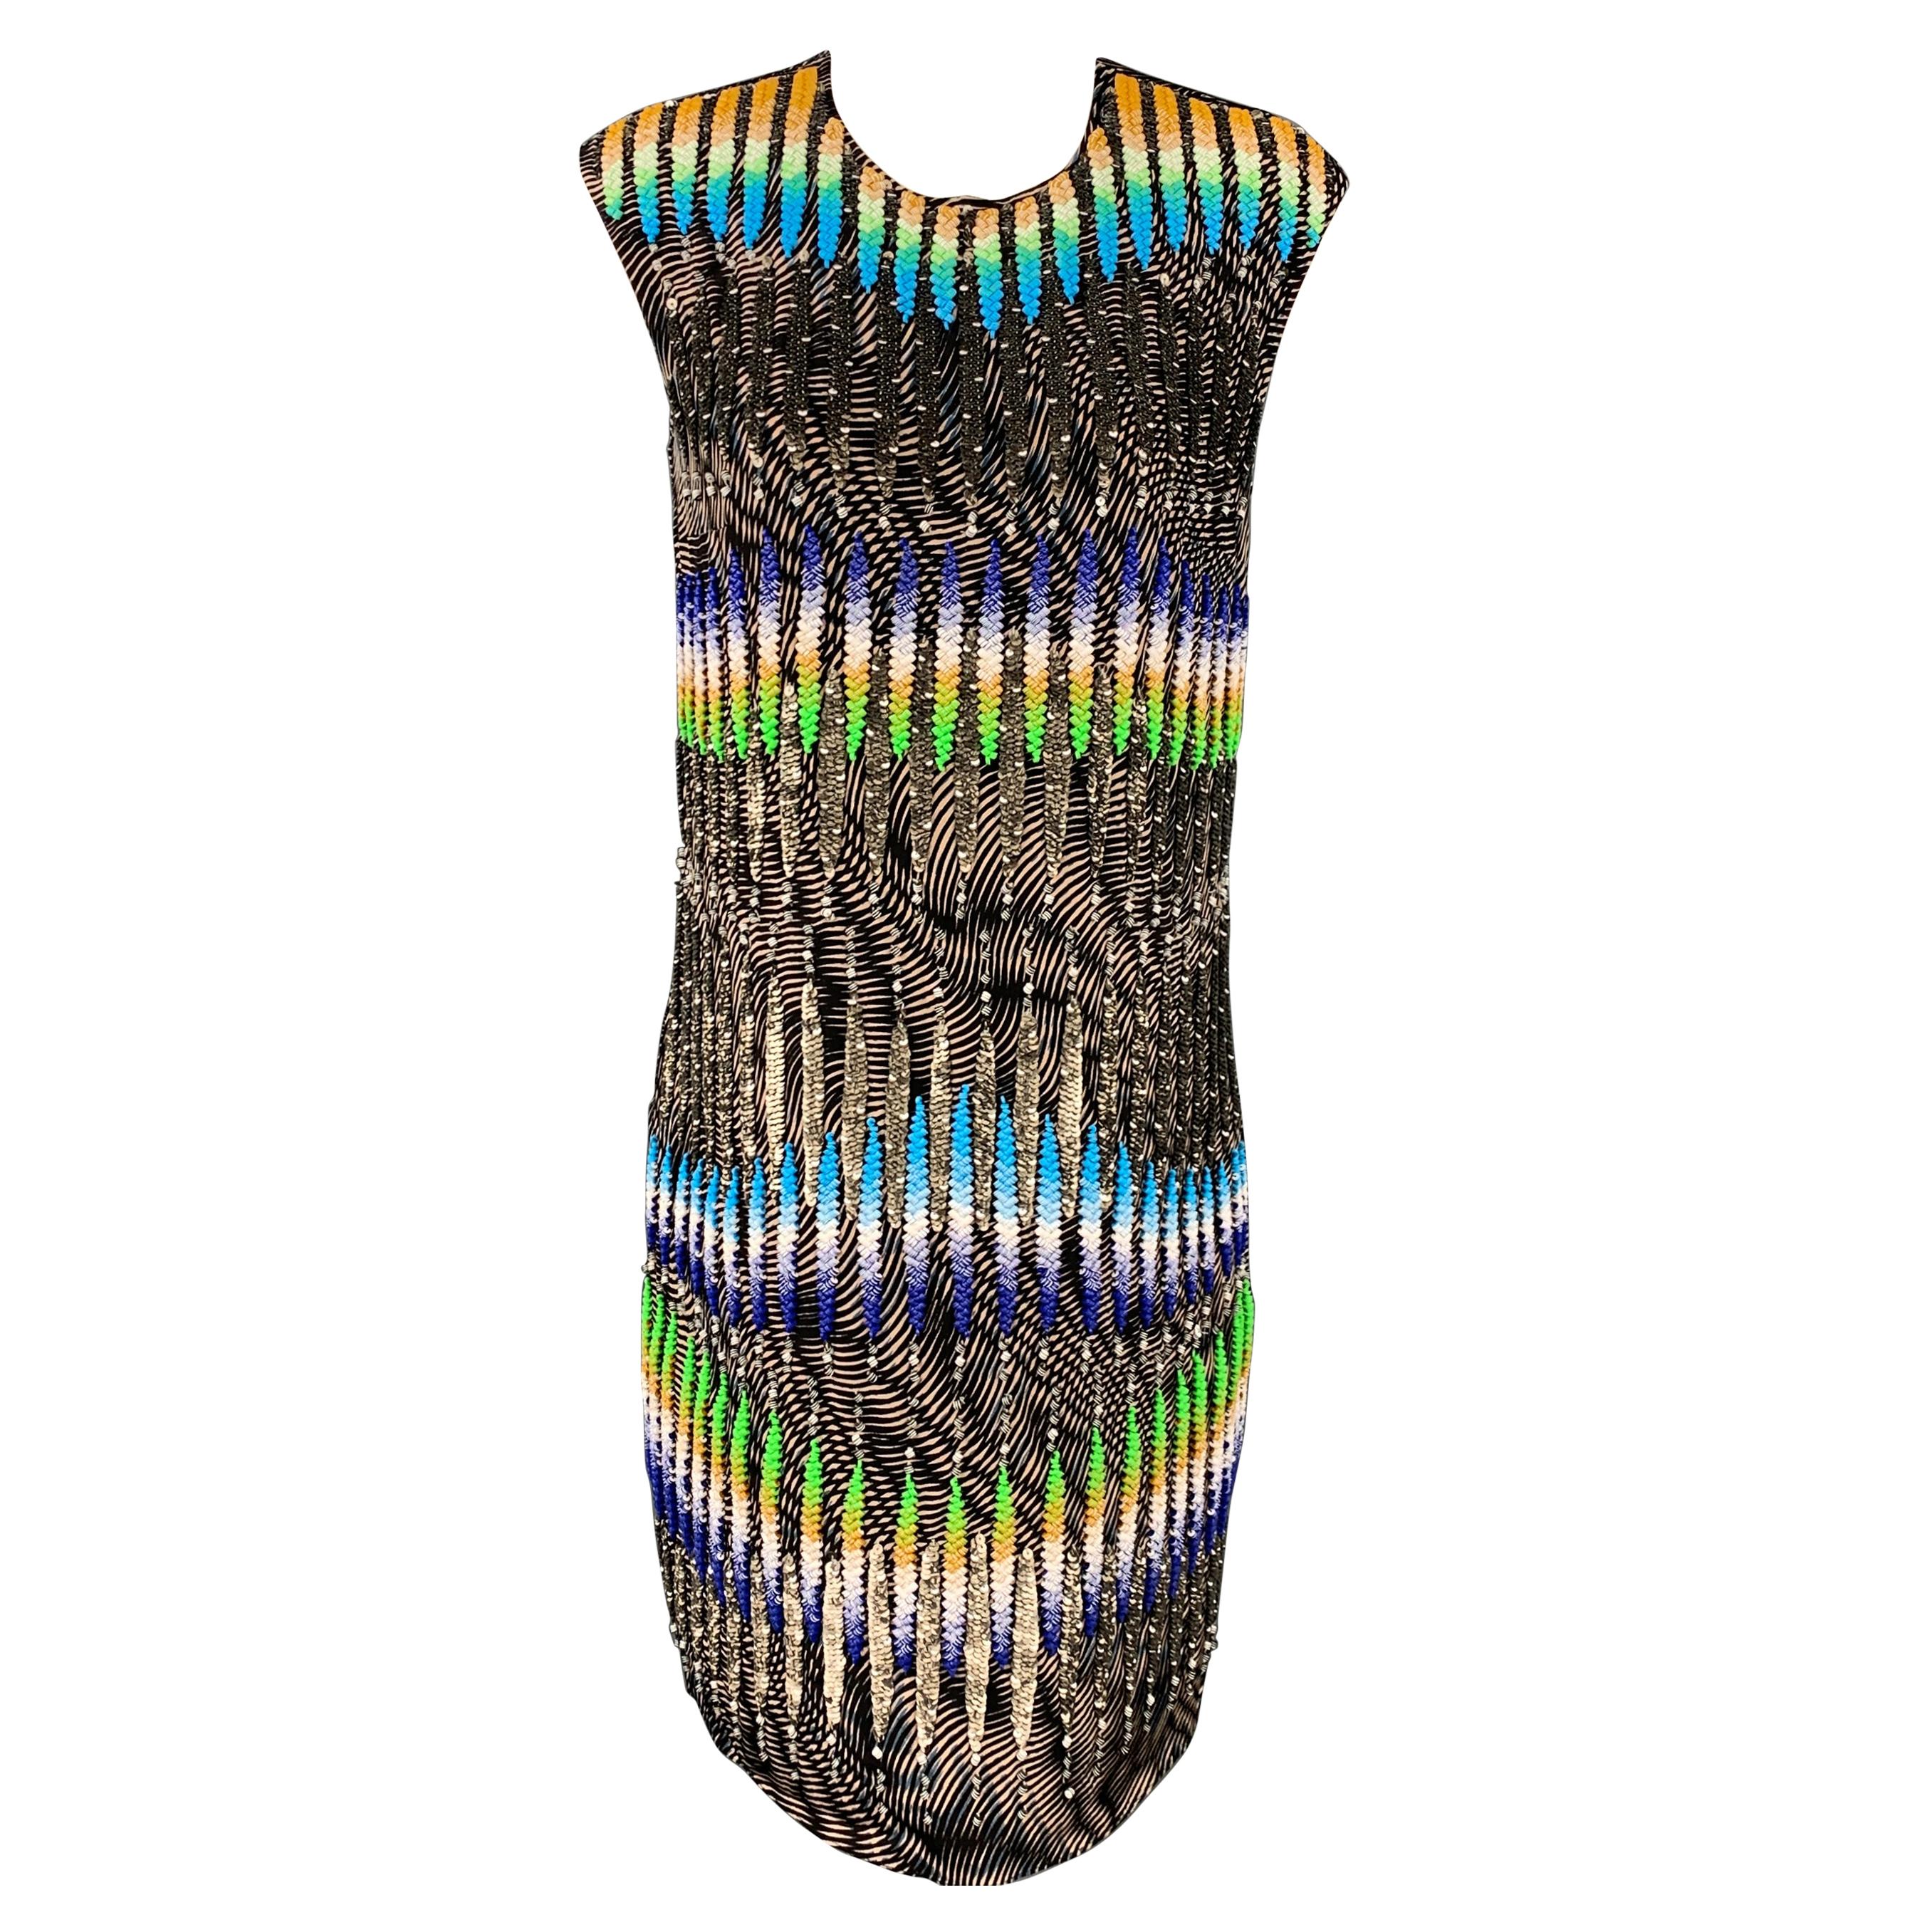 PETER PILOTTO Size 6 Multi-Color Sequined Beaded Silk Shift Dress